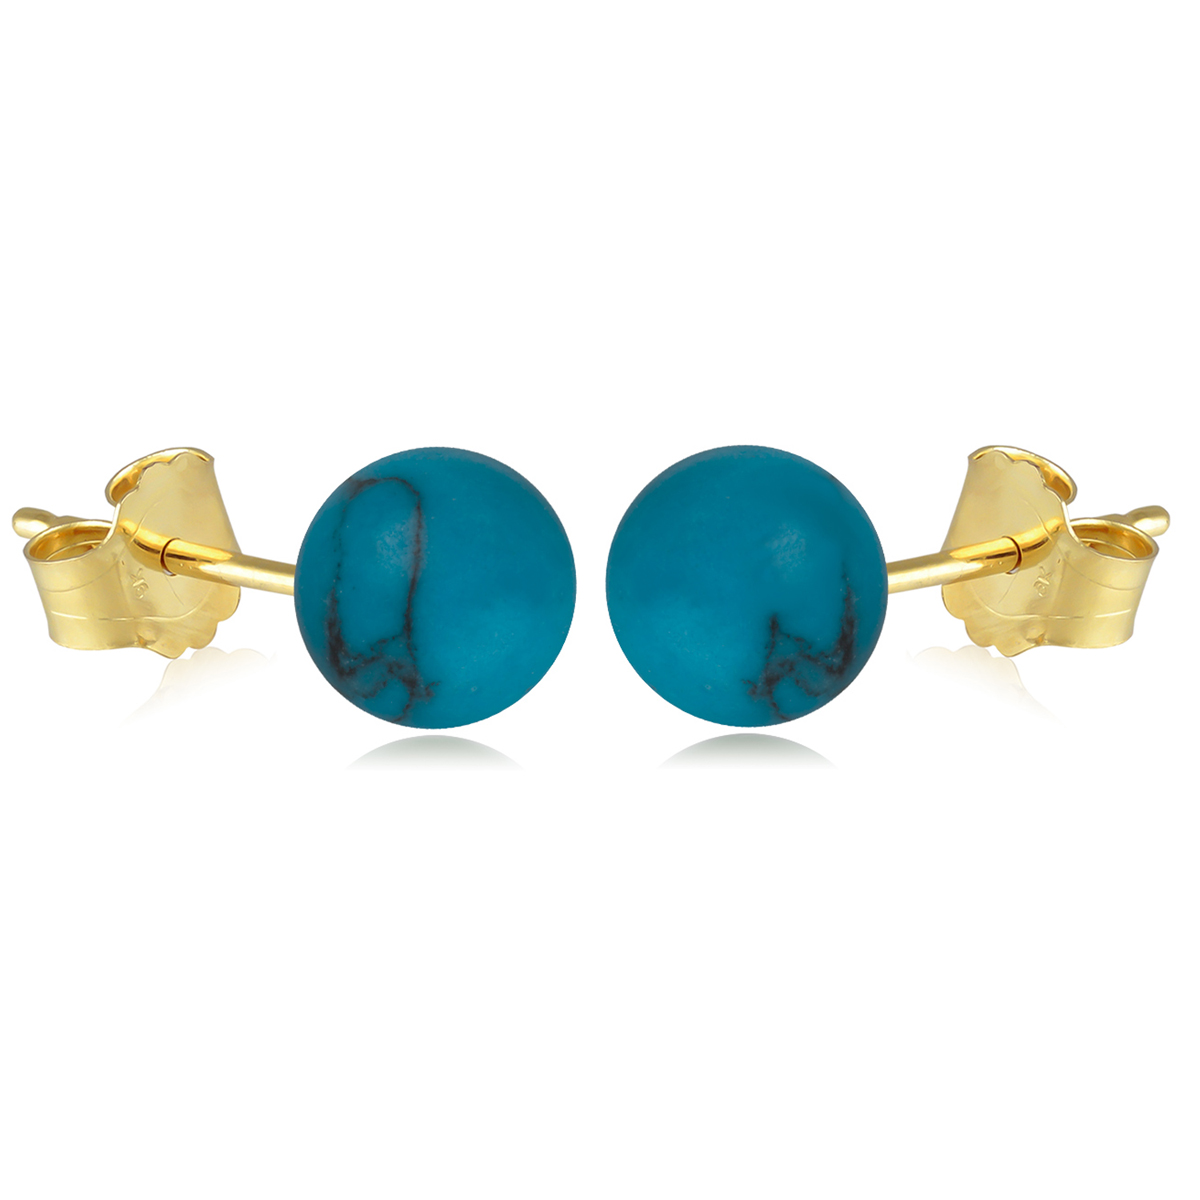 Boucles plaqué or \'Mineralia\' turquoise - 6 mm - [M6688]